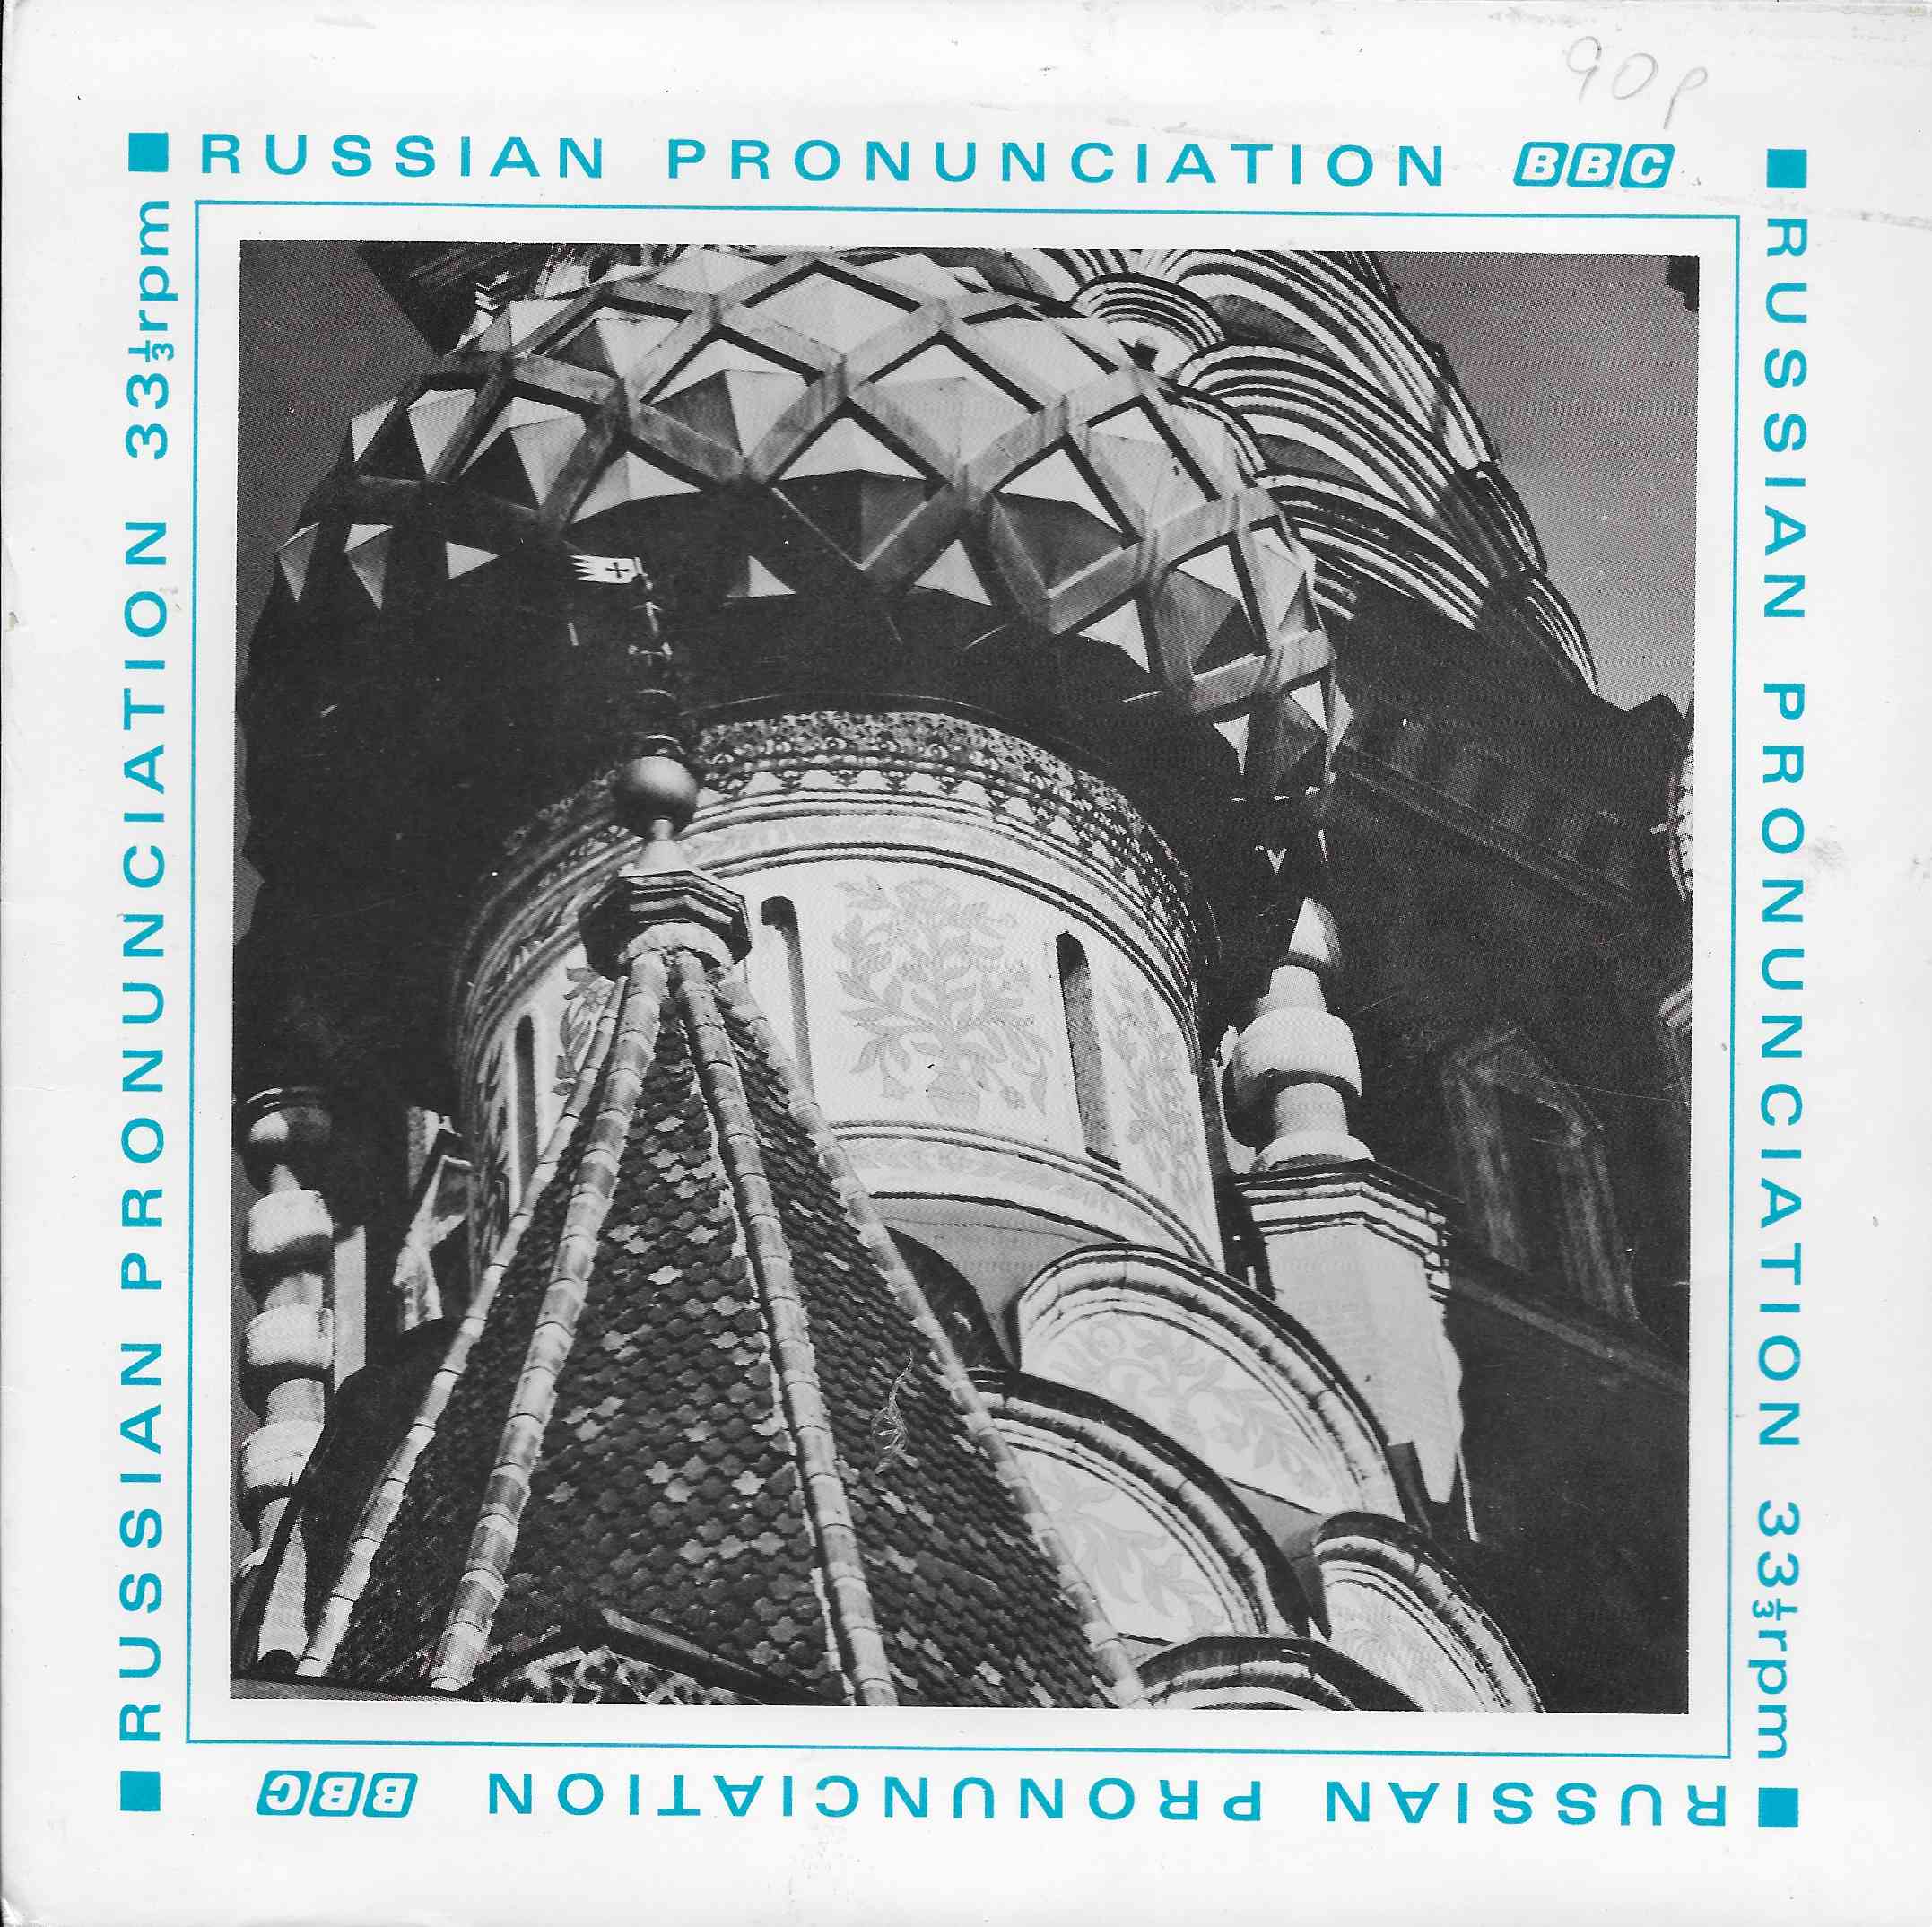 Picture of OP 197/198 Russian pronunciation by artist Natalie Waterson from the BBC singles - Records and Tapes library